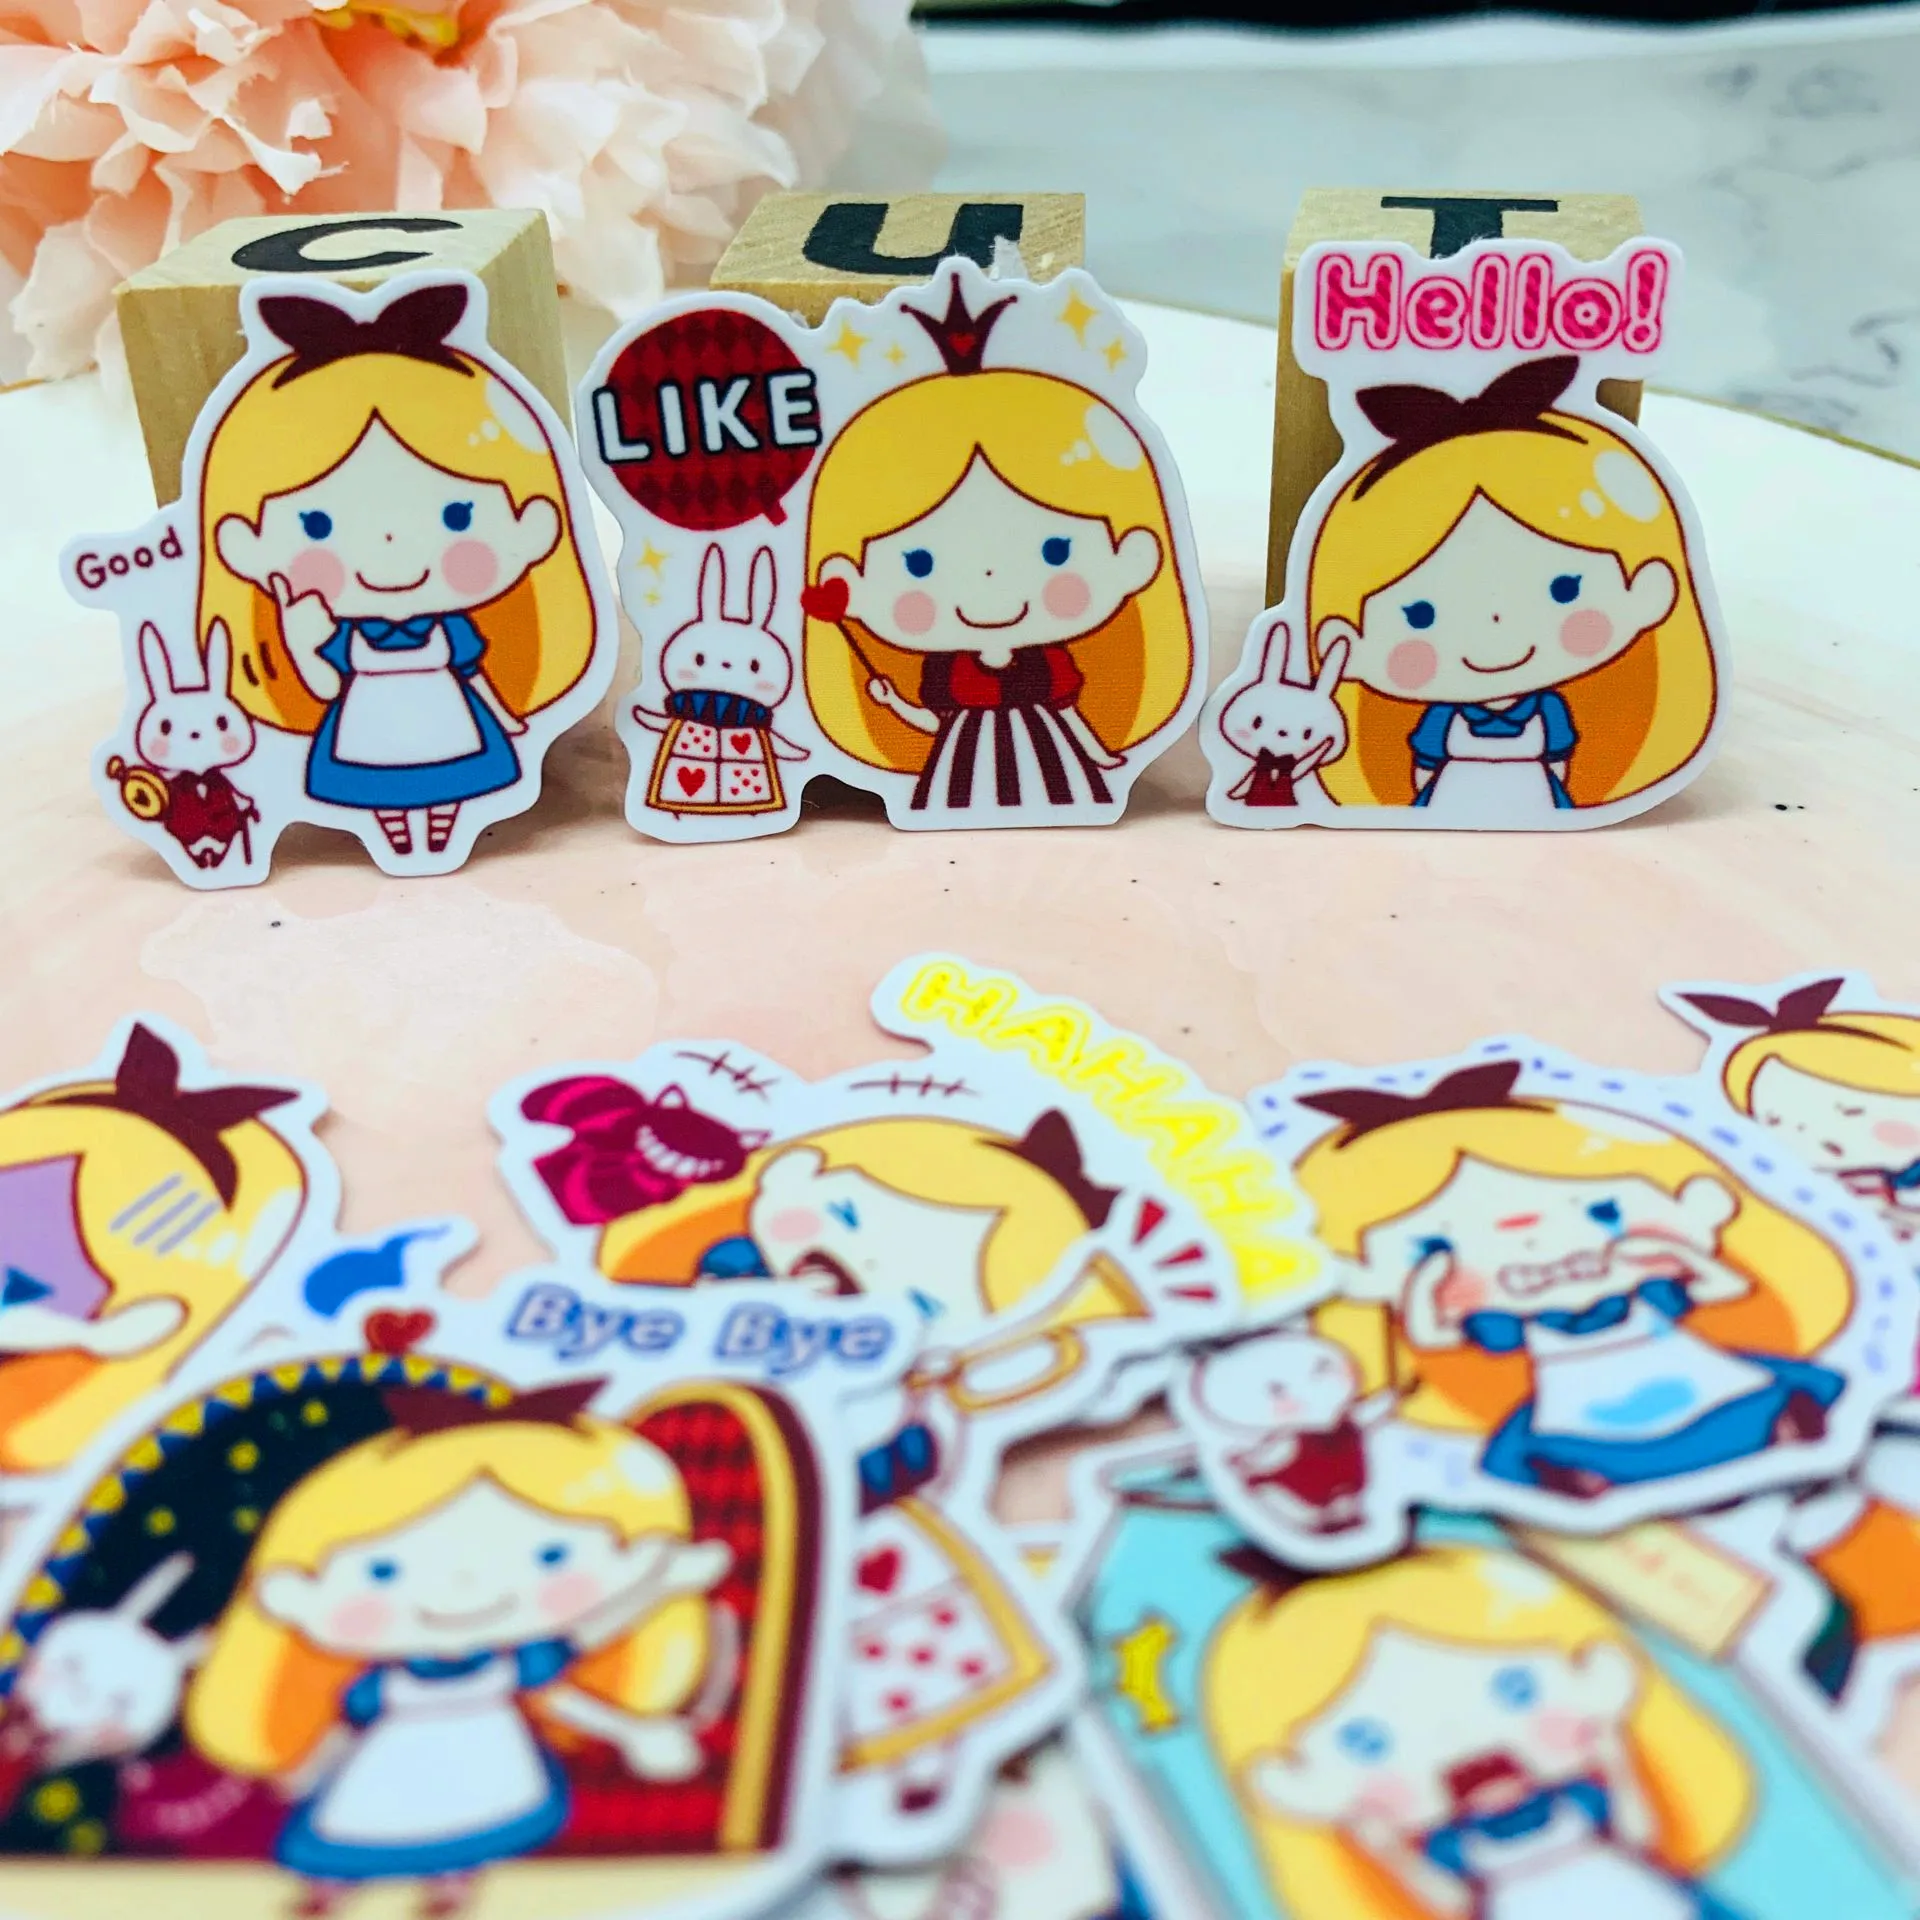 

40 pcs Mixed Cartoon cute maid Waterproof laptap stickers for Home decor on laptop decal fridge skateboard doodle toy sticker